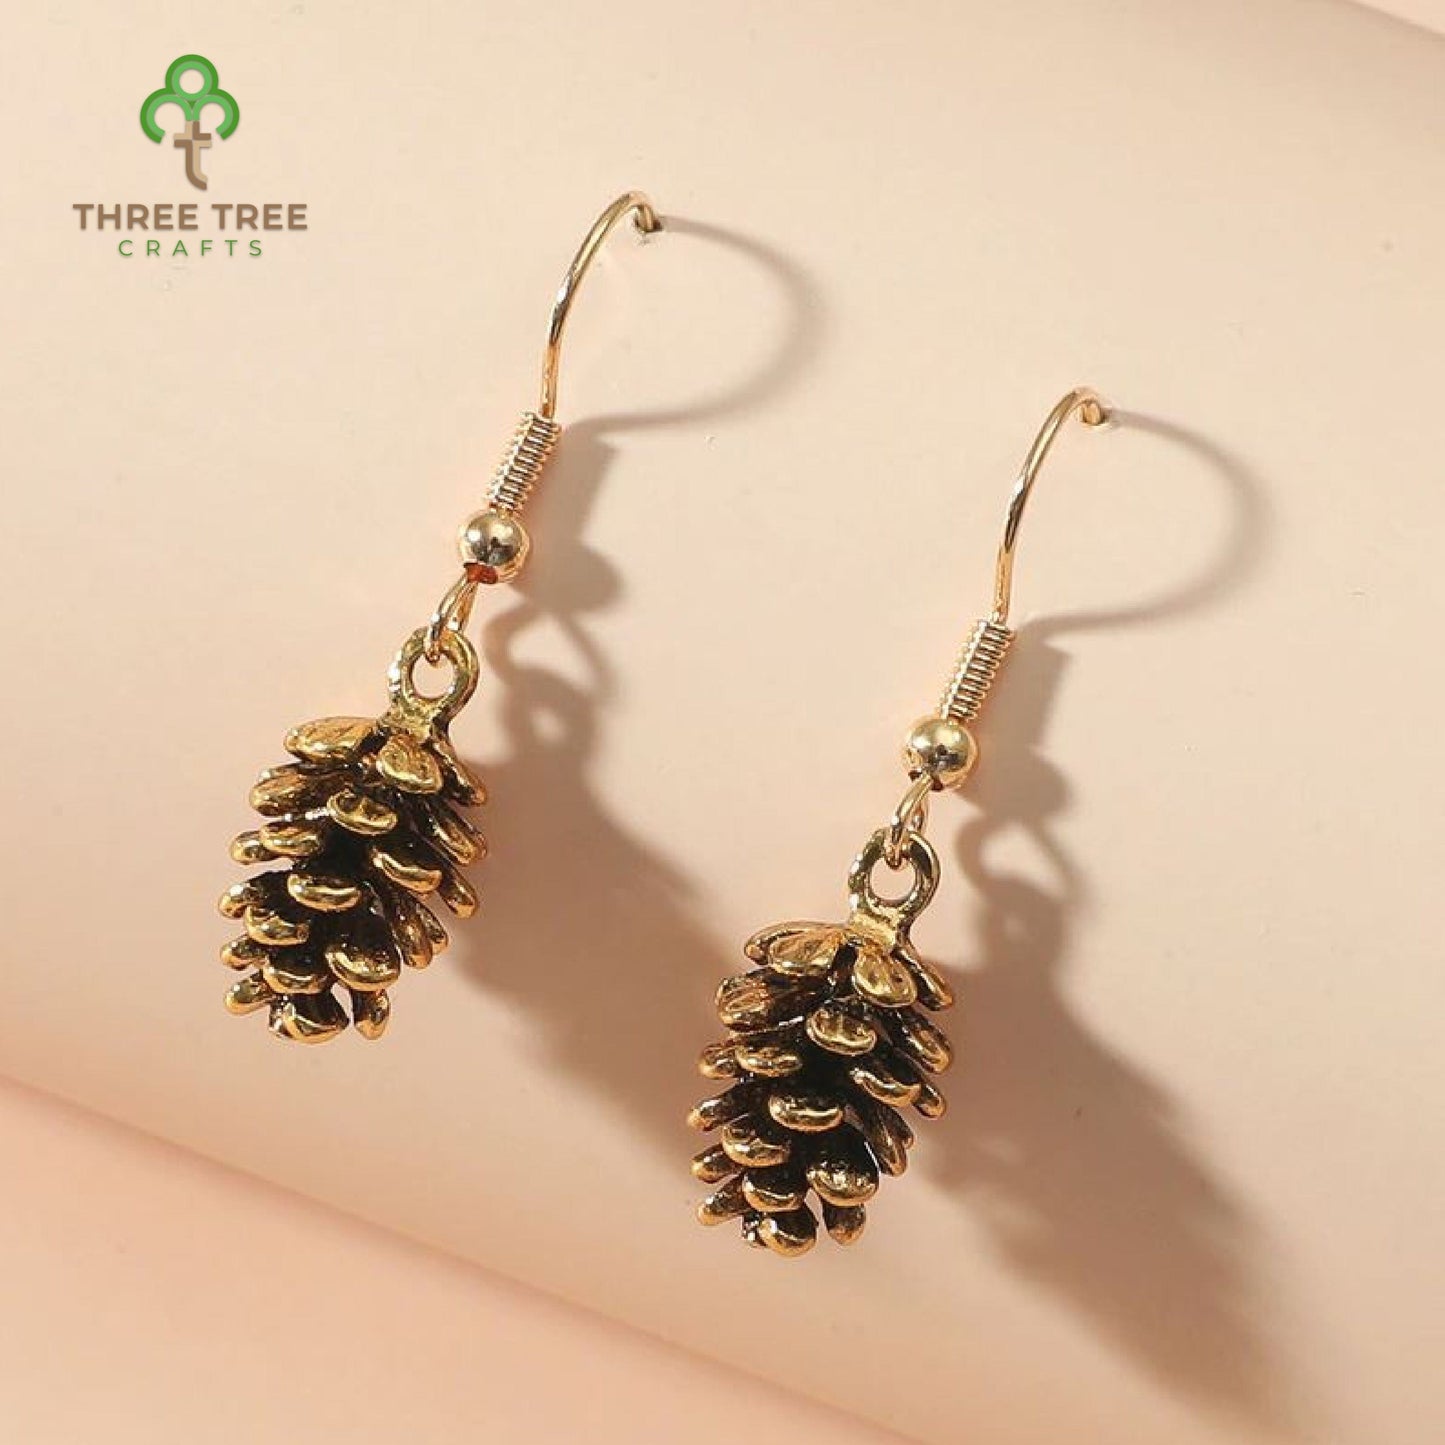 Three Tree Crafts Pinecone Necklace & Earrings